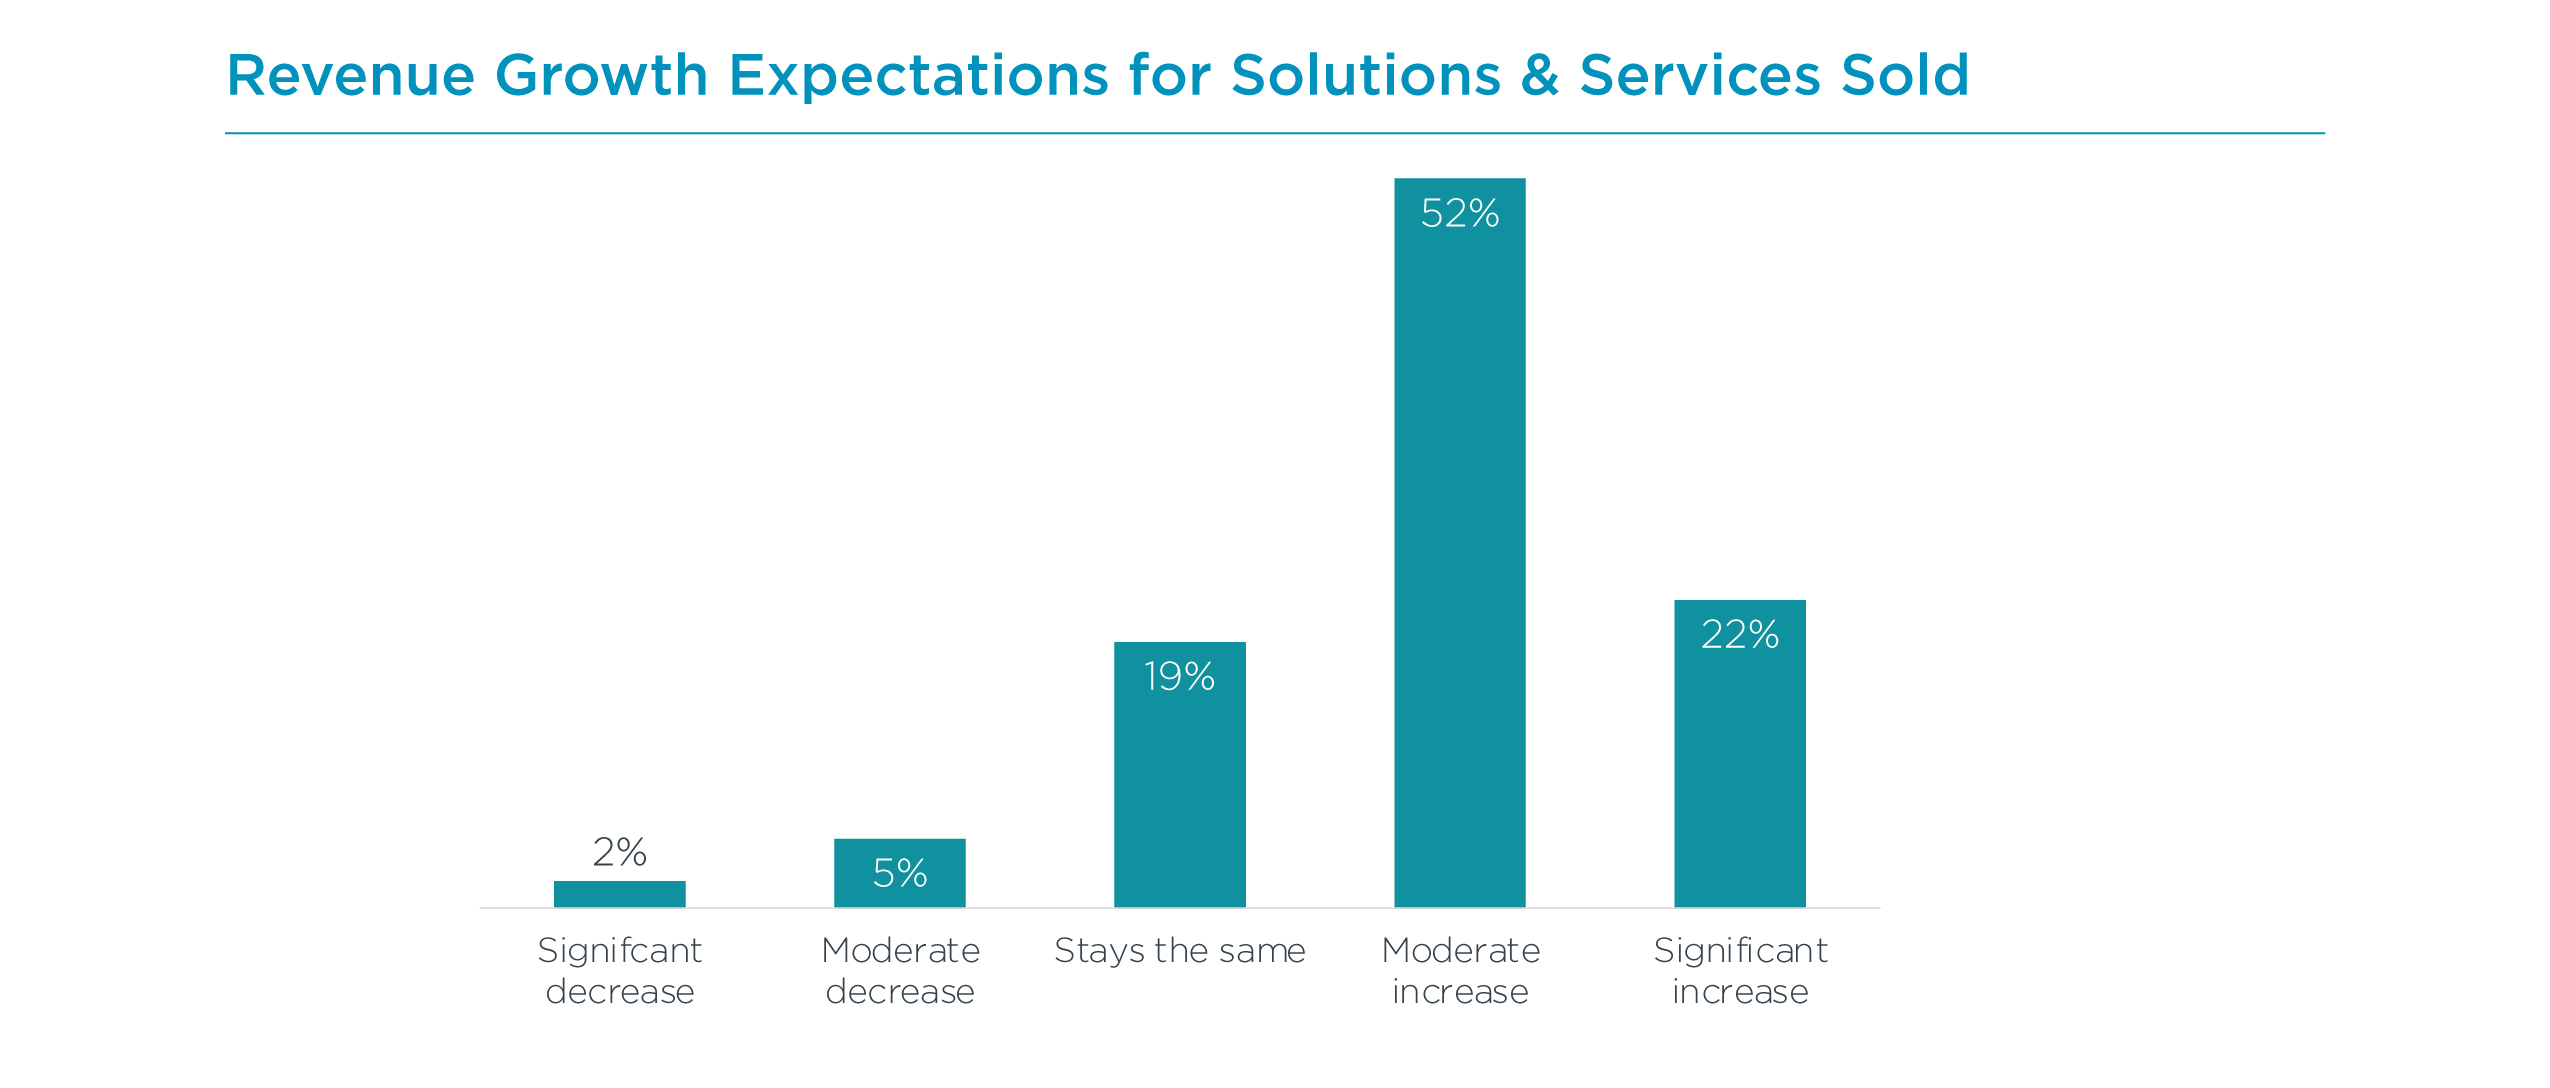 Revenue Growth Expectations for Solutions & Services Sold